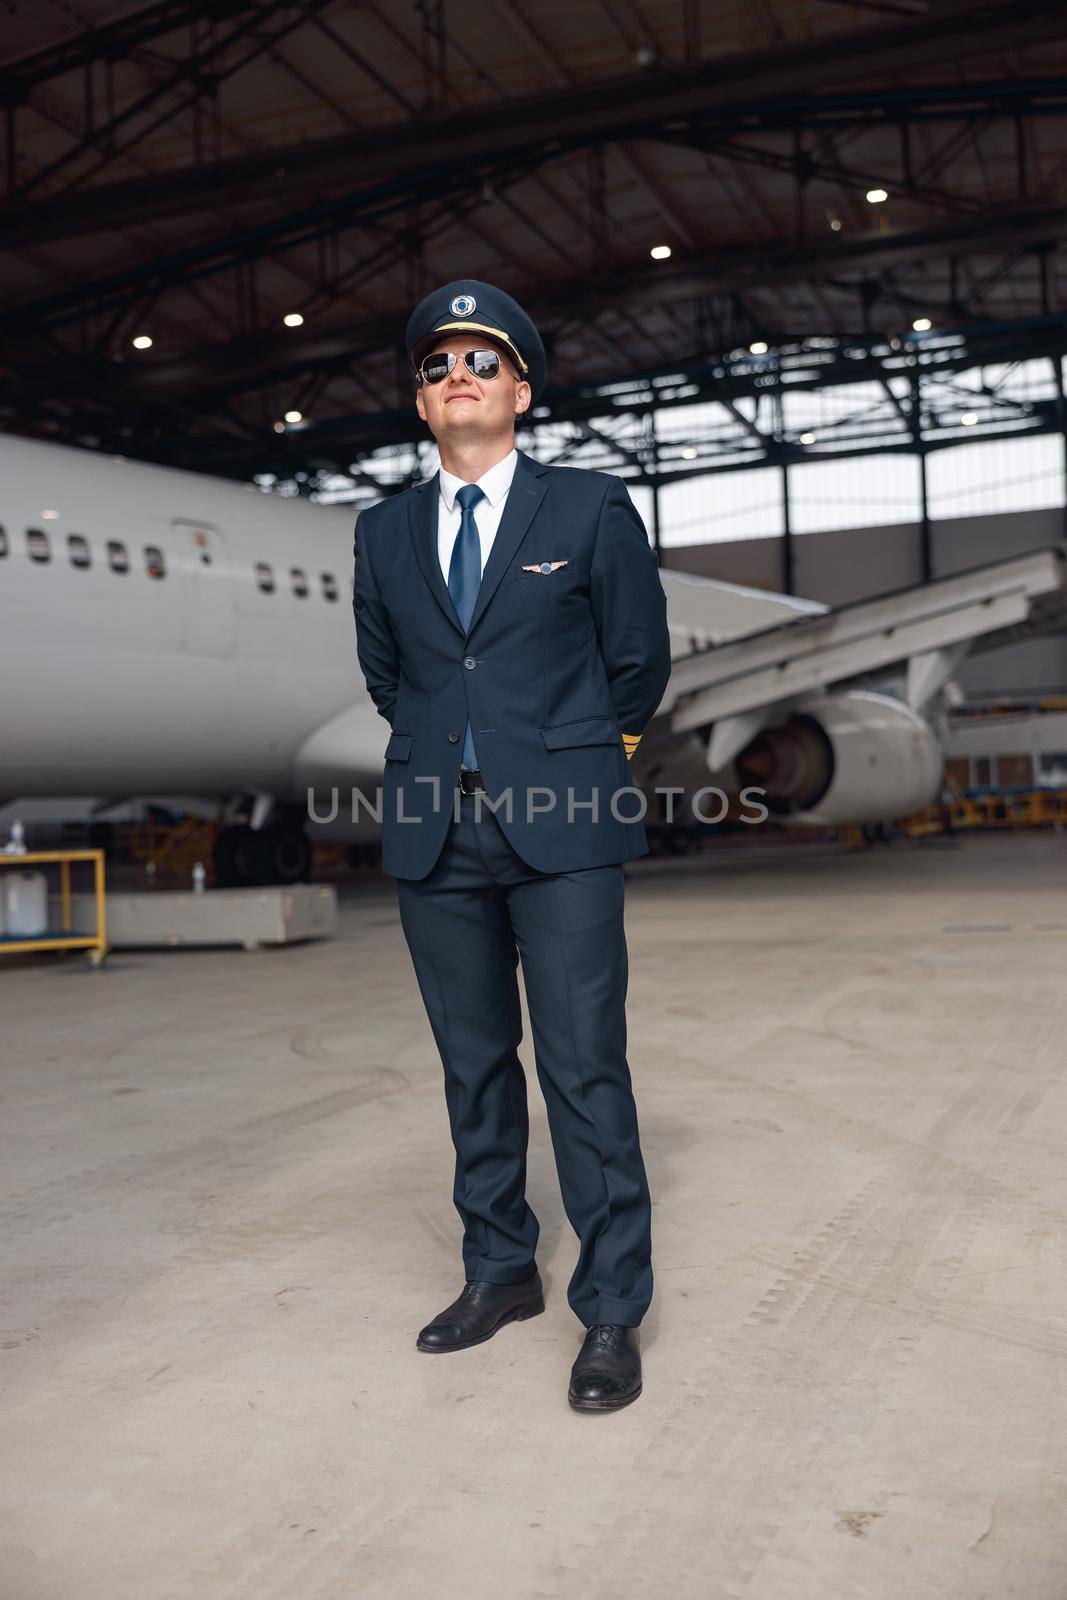 Full length shot of proud pilot in uniform and aviator sunglasses smiling away, standing in front of big passenger airplane in airport hangar. Aircraft, occupation, transportation concept